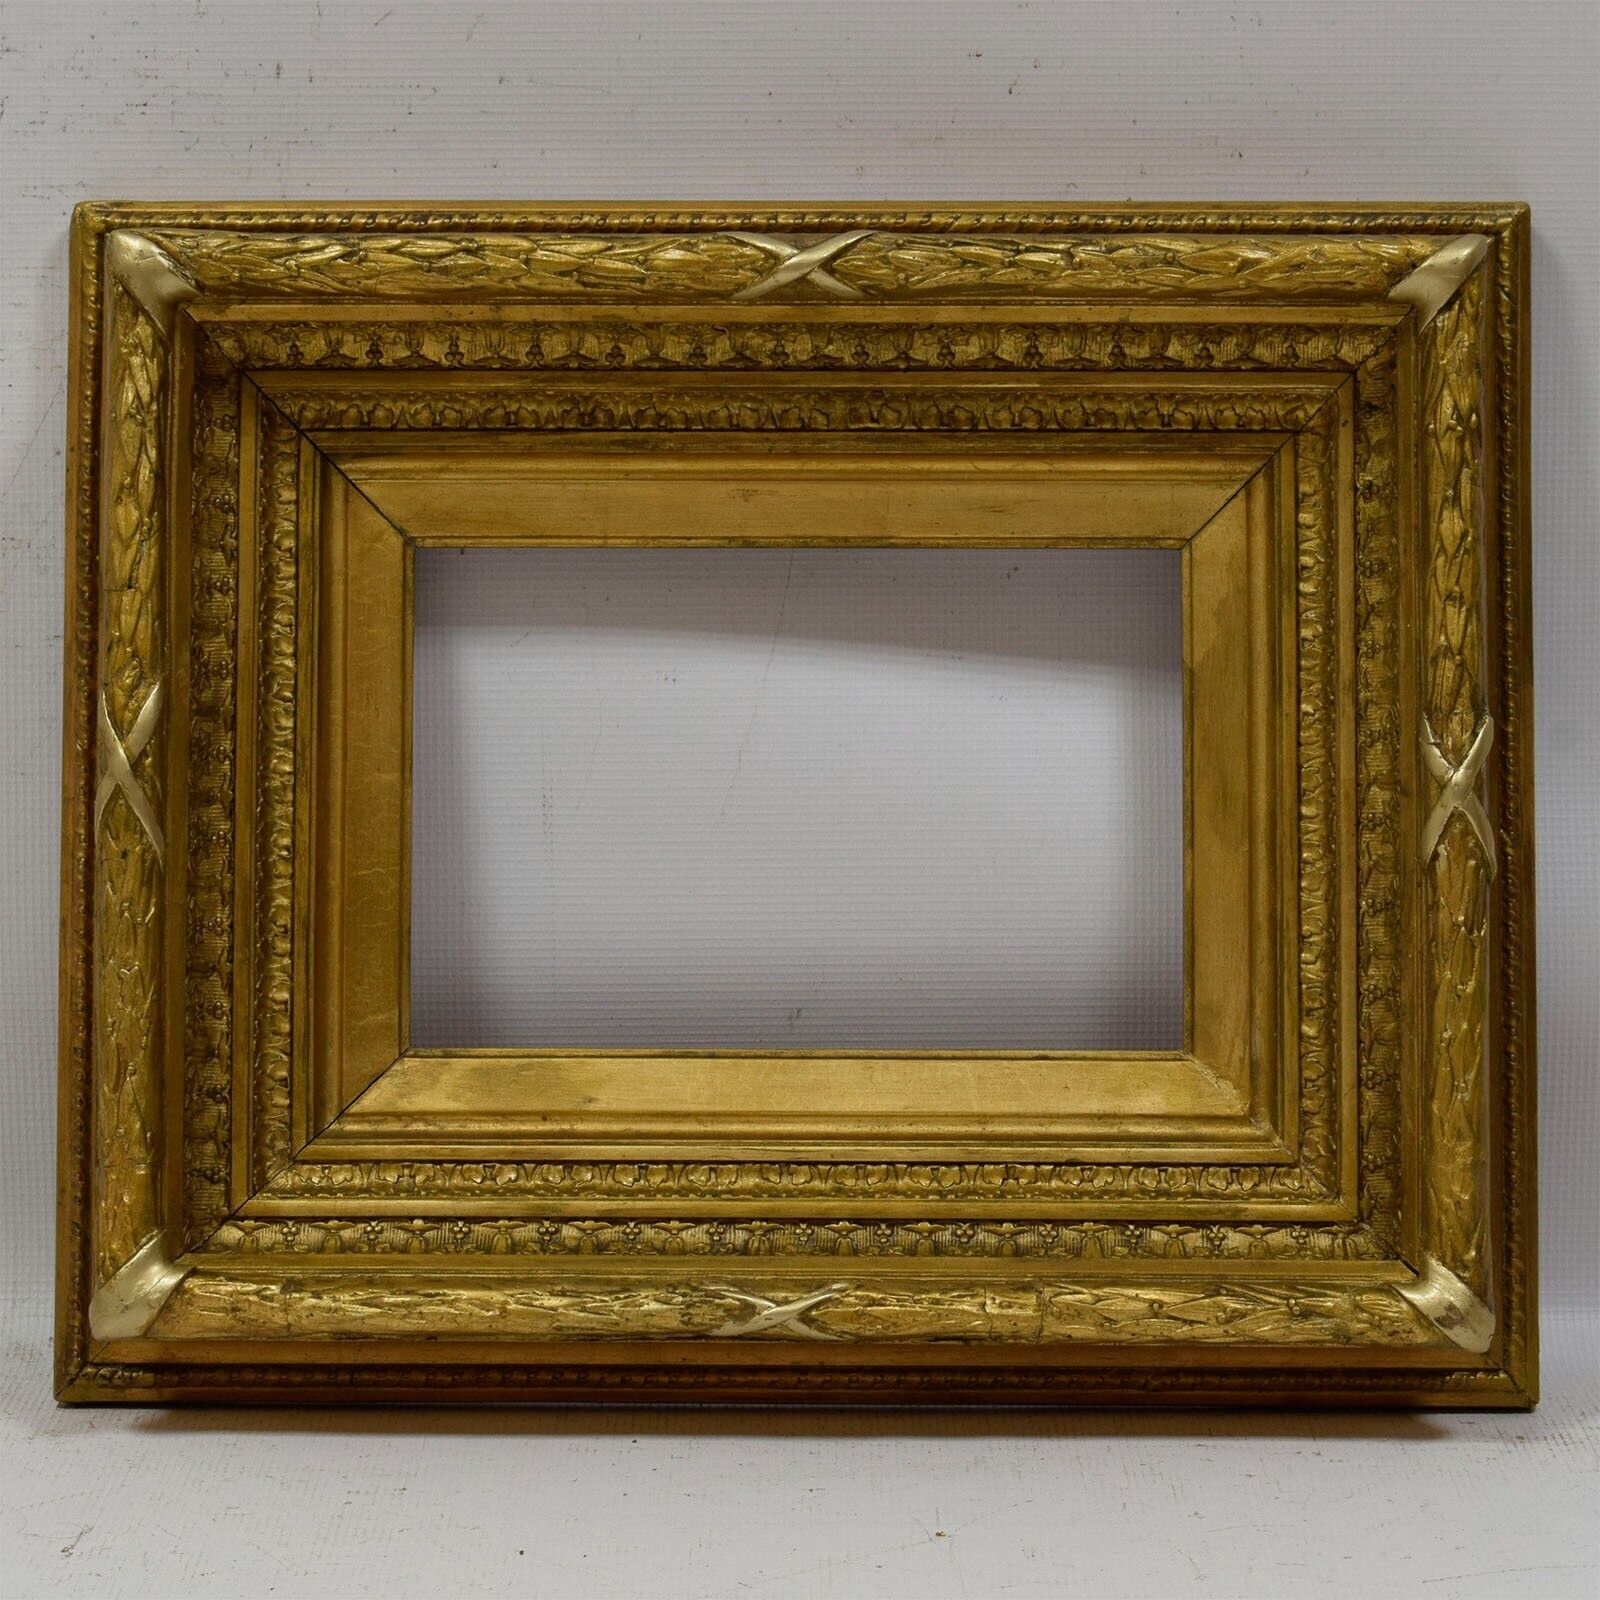 Ca. 1850-1900 Old wooden frame Original condition Internal: 10,8x7,6 in